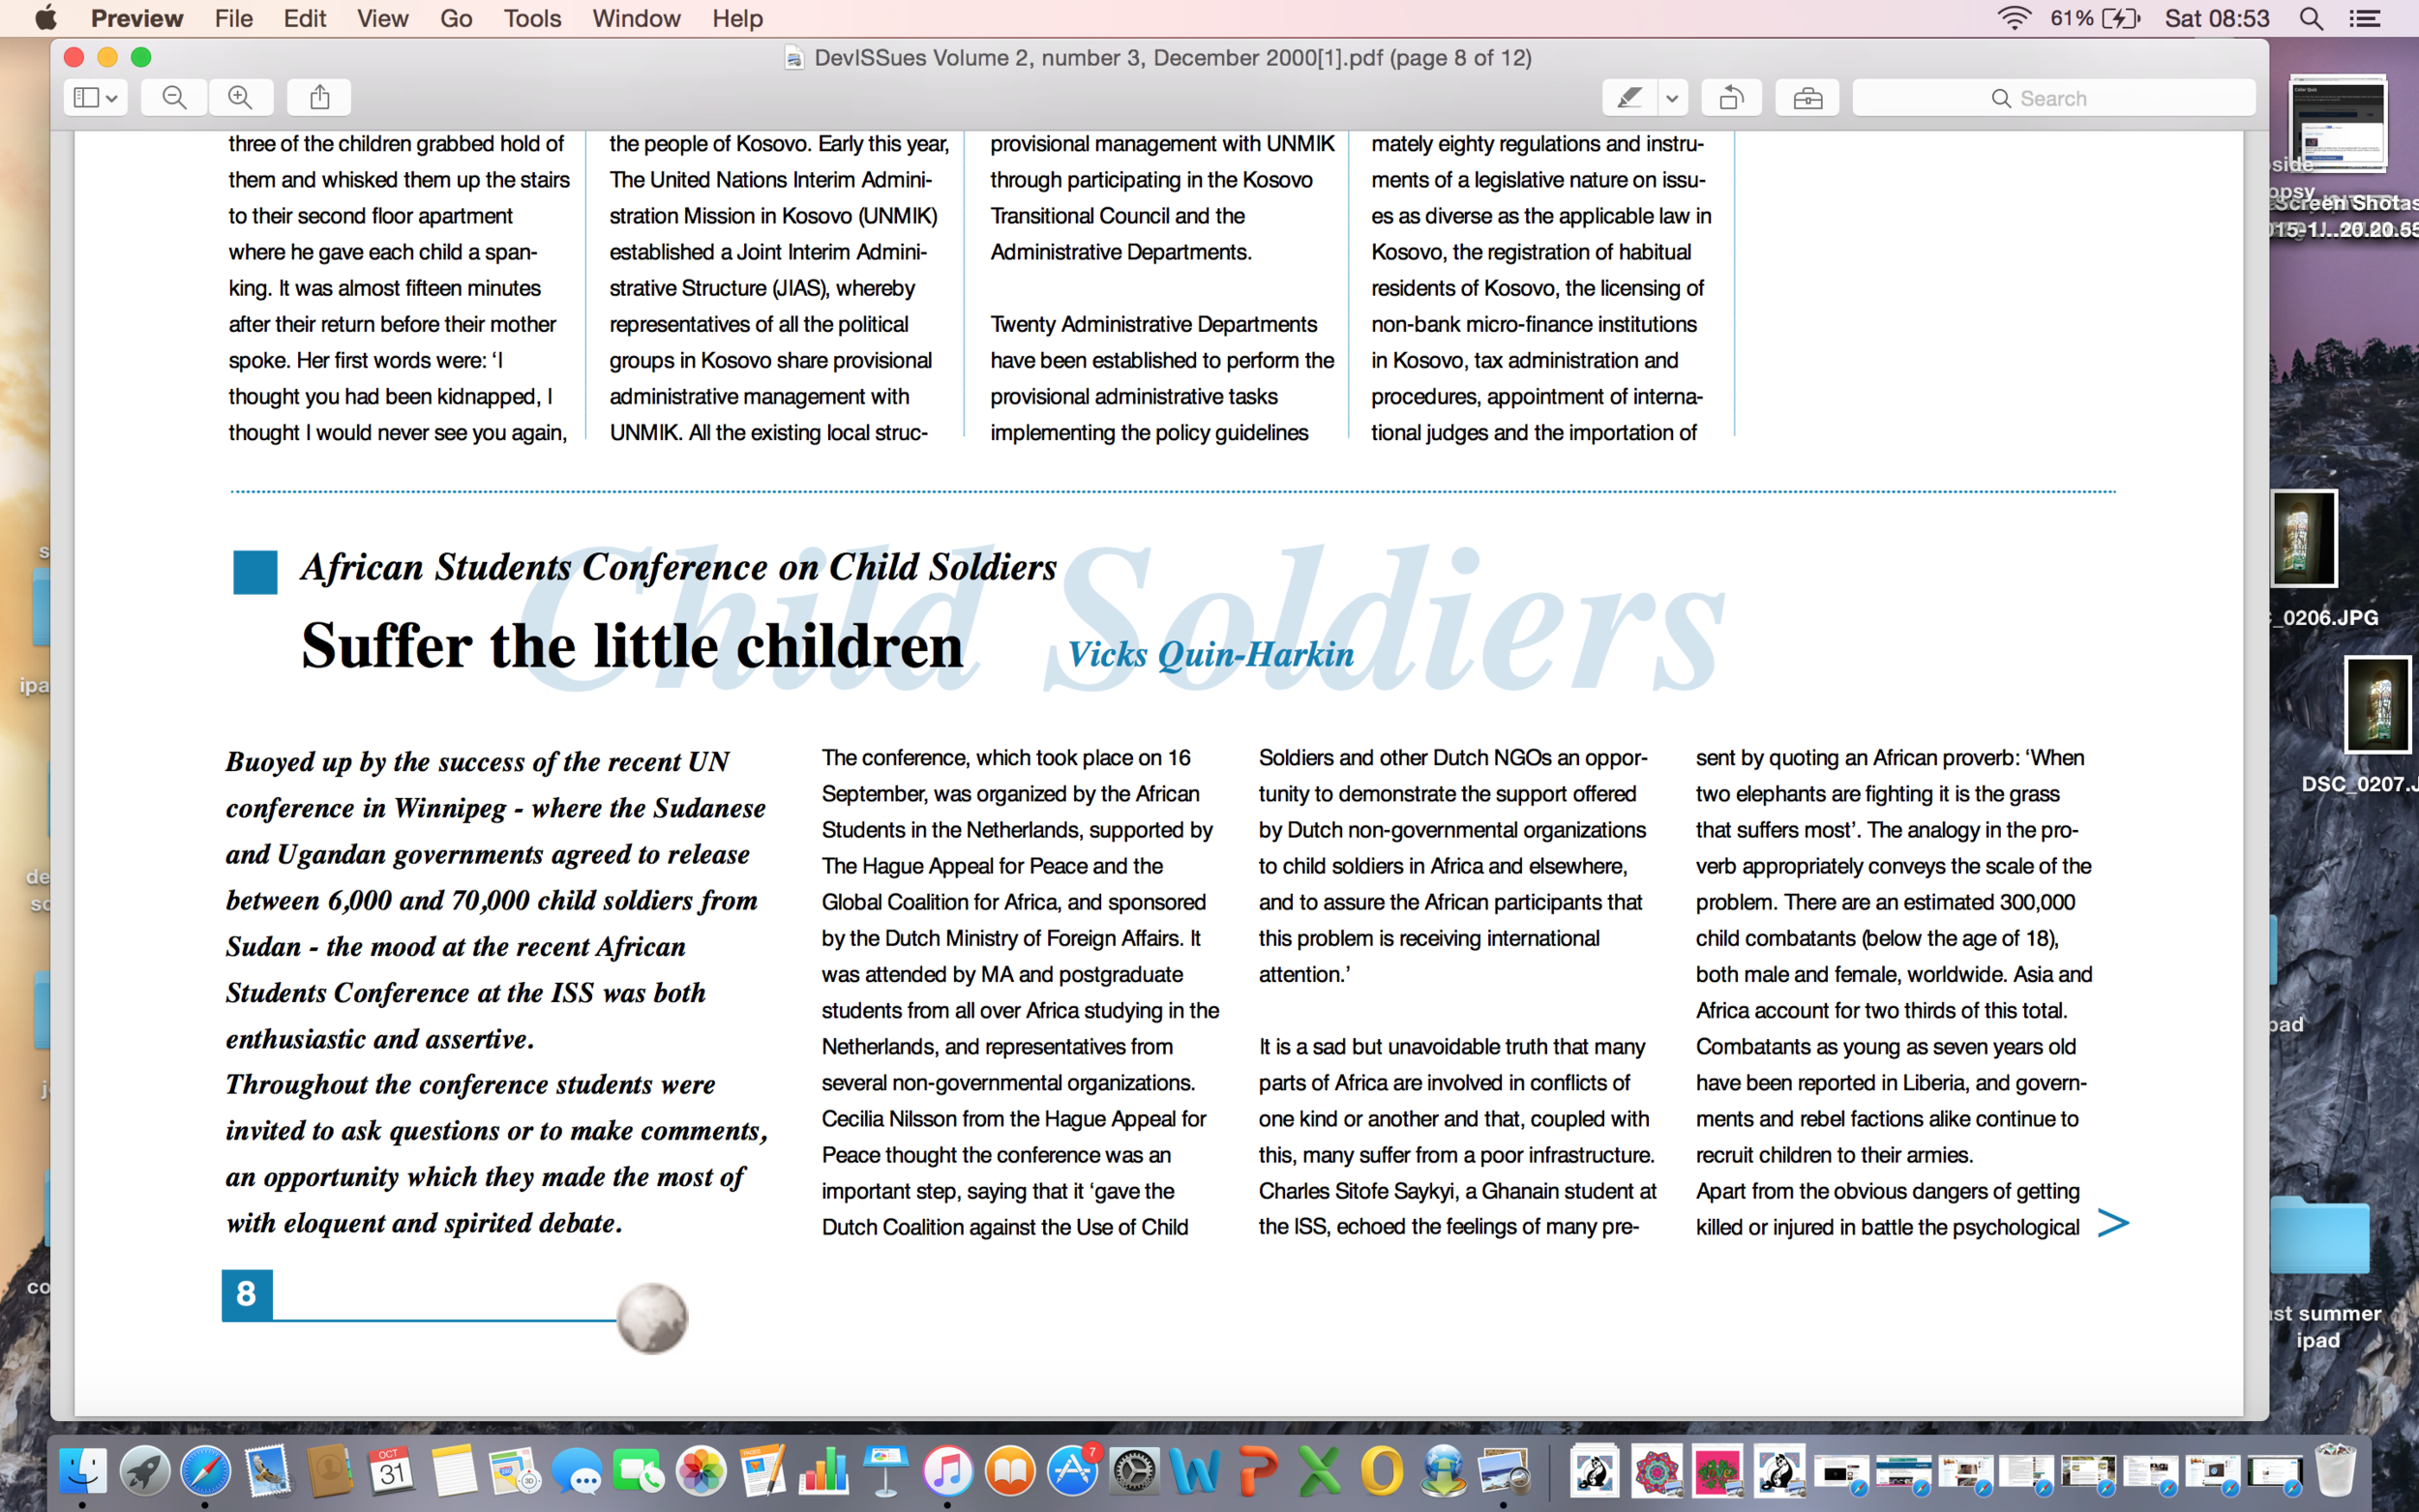 African Students Conference Child Soldiers 2015-10-31 at 08.53.23.png